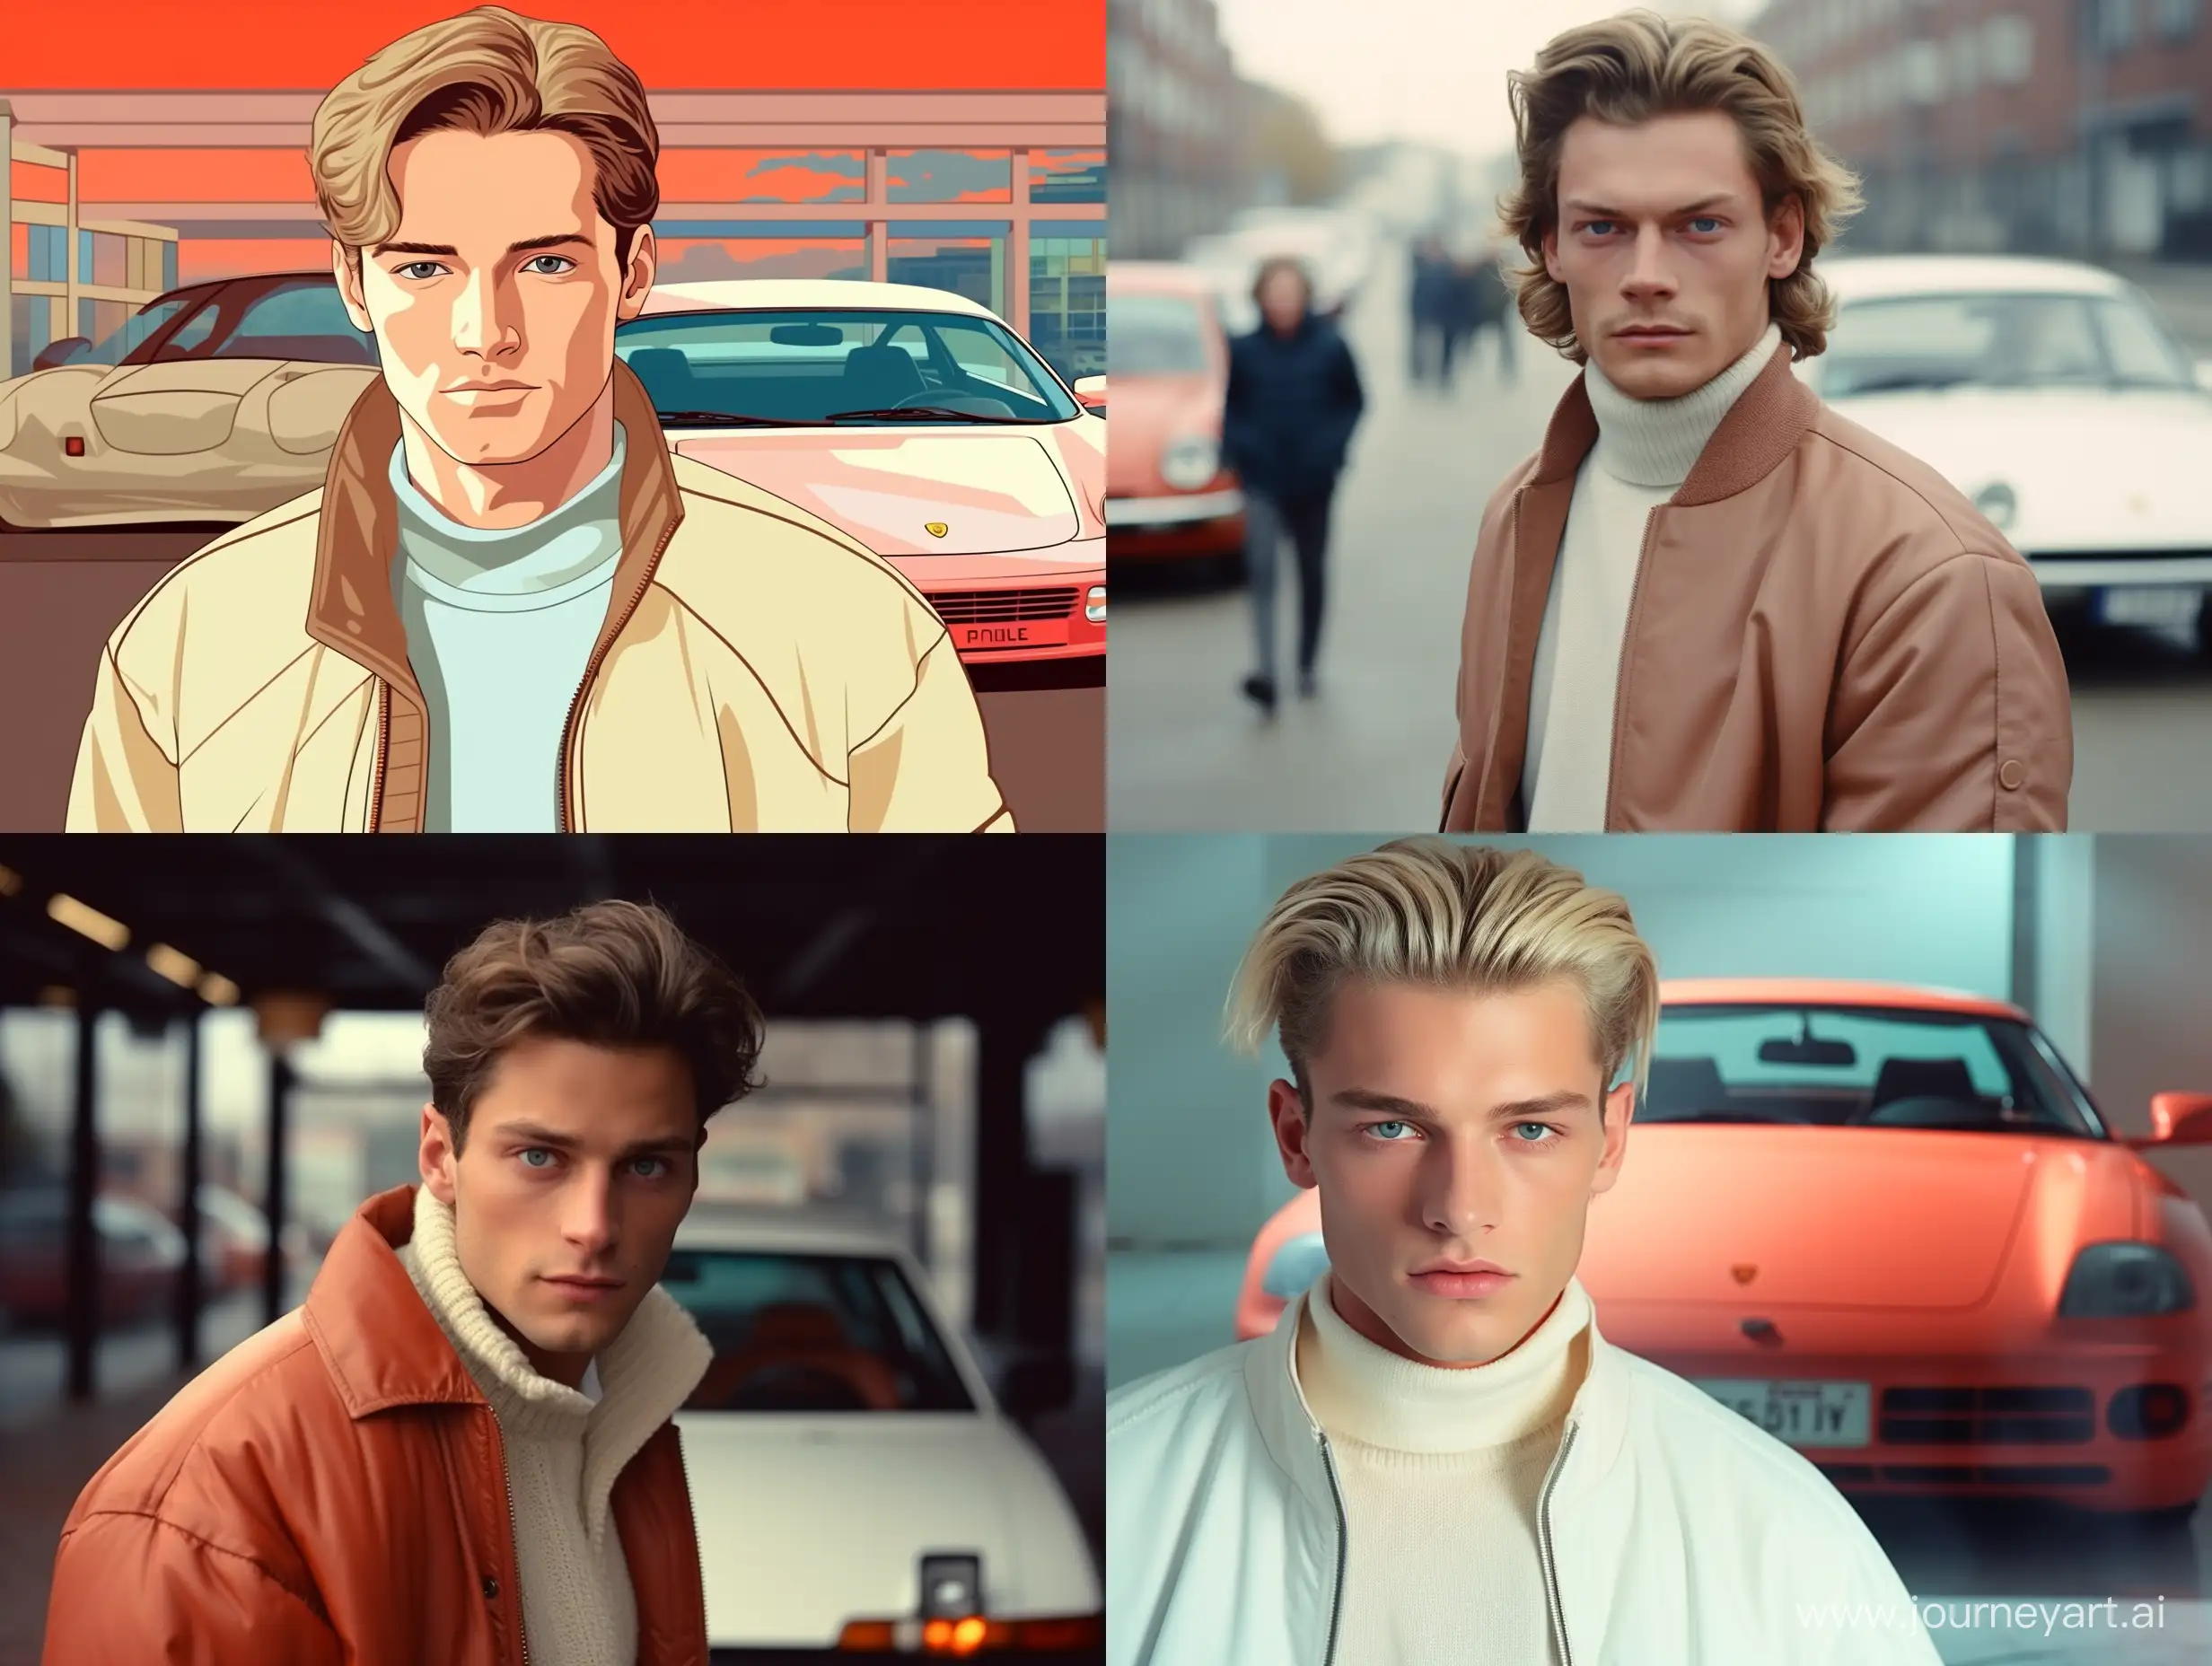 Stylish-Young-Man-in-Beige-Jacket-with-Porsche-930-in-CCTV-Footage